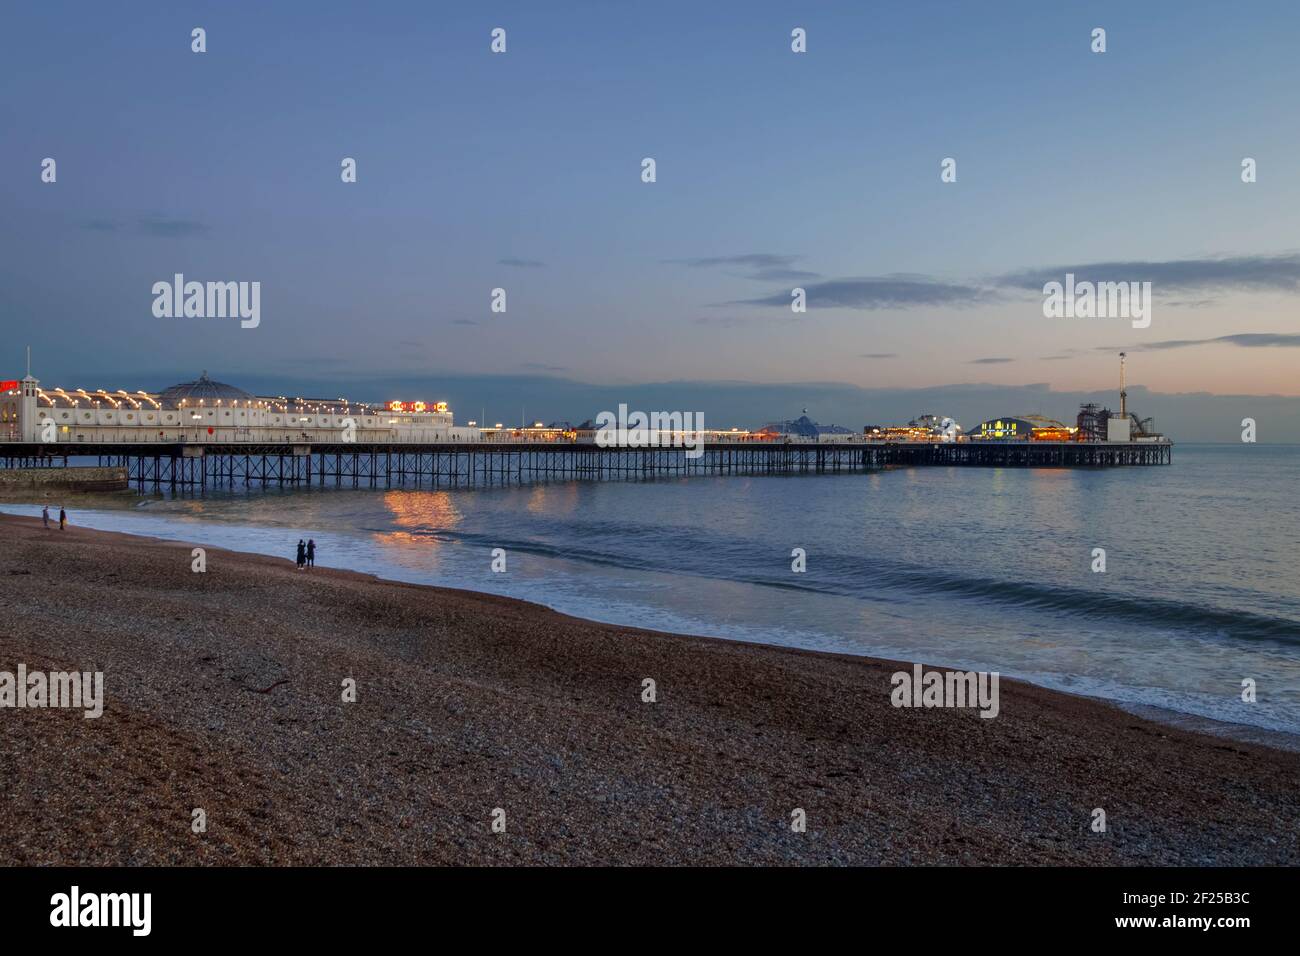 BRIGHTON, EAST SUSSEX/UK - JANUARY 26 : View of Brighton Pier in Brighton East Sussex on January 26, 2018. Unidentified people. Stock Photo